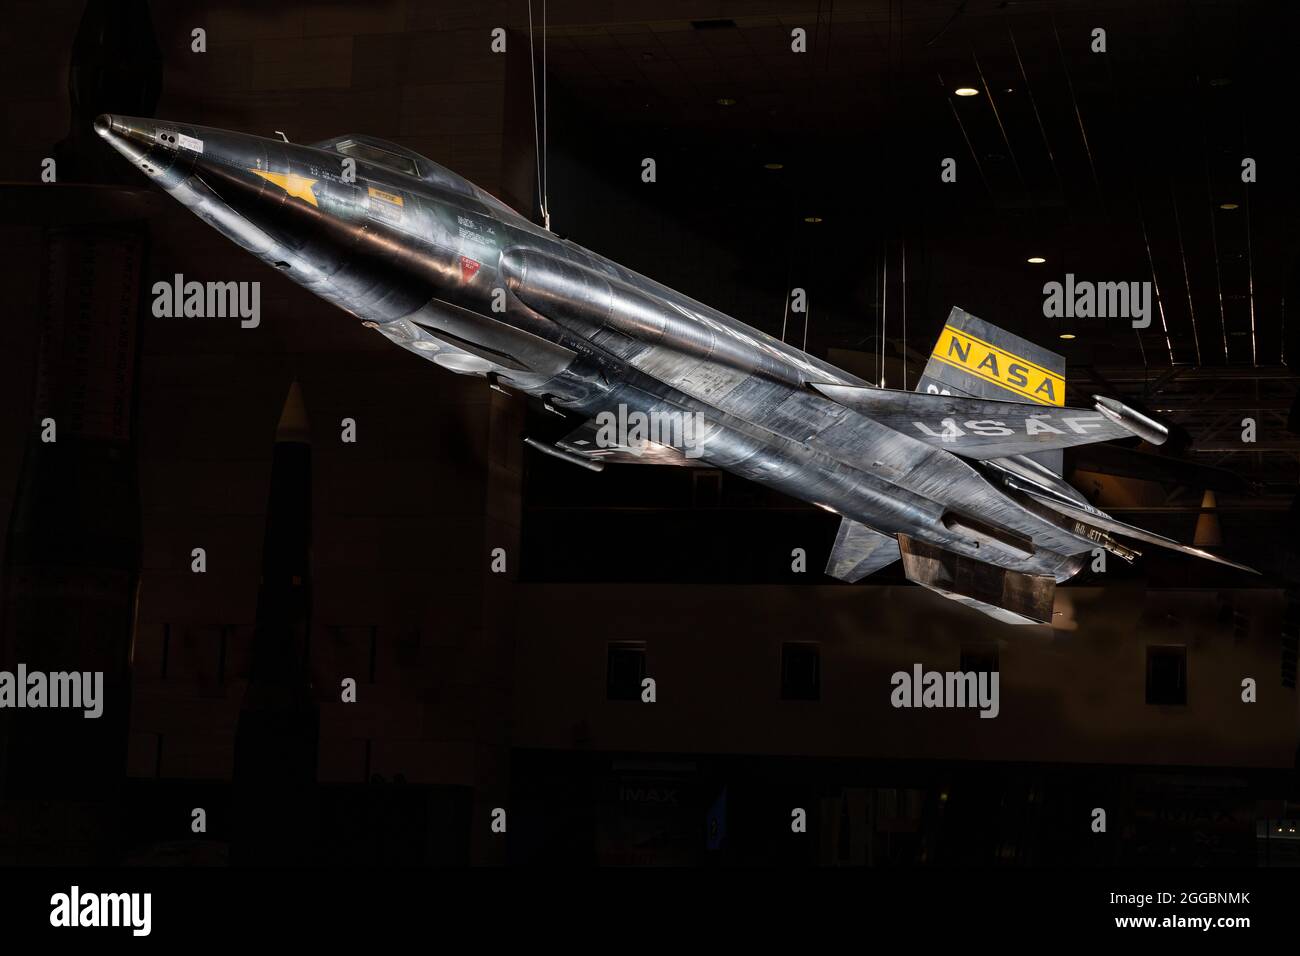 World's Fastest Piloted Aircraft. Piloted by Neil Armstrong. Bridged the gap between human flight in the atmosphere and spaceflight. North American X-15, rocket powered experimental aircraft; black titanium skin with wedge shaped horizontal stablizer; yellow stripe NASA inisignia on tail with stars and red bars United States national insignia on wings; white letter text &quot;U.S. AIR FORCE&quot; on the sides of the fuselage. Stock Photo